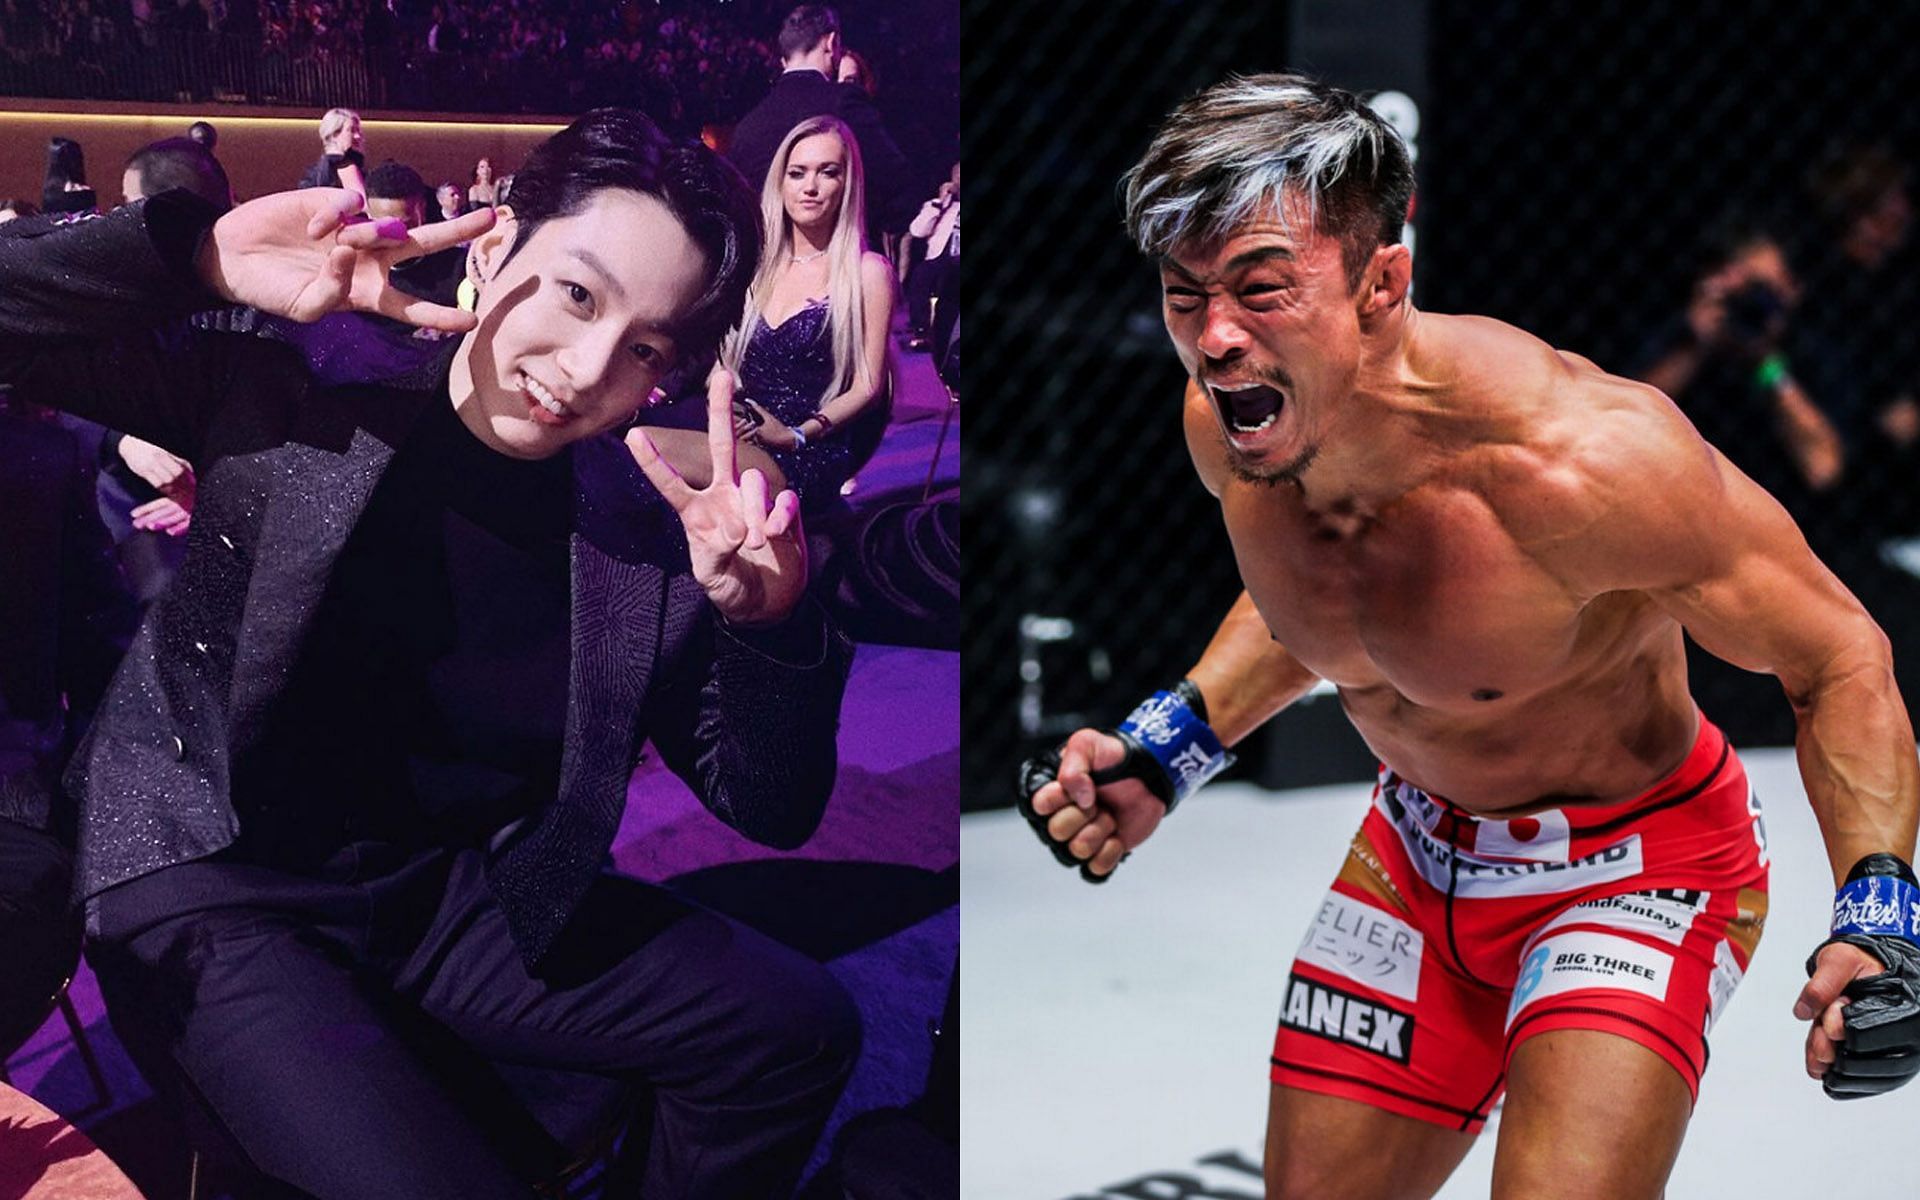 Jungkook (L) of BTS responded to Yoshihiro Akiyama&#039;s (R) challenge for sparring. | [Photos: jungkook.97 on Instagram/ONE Championship]